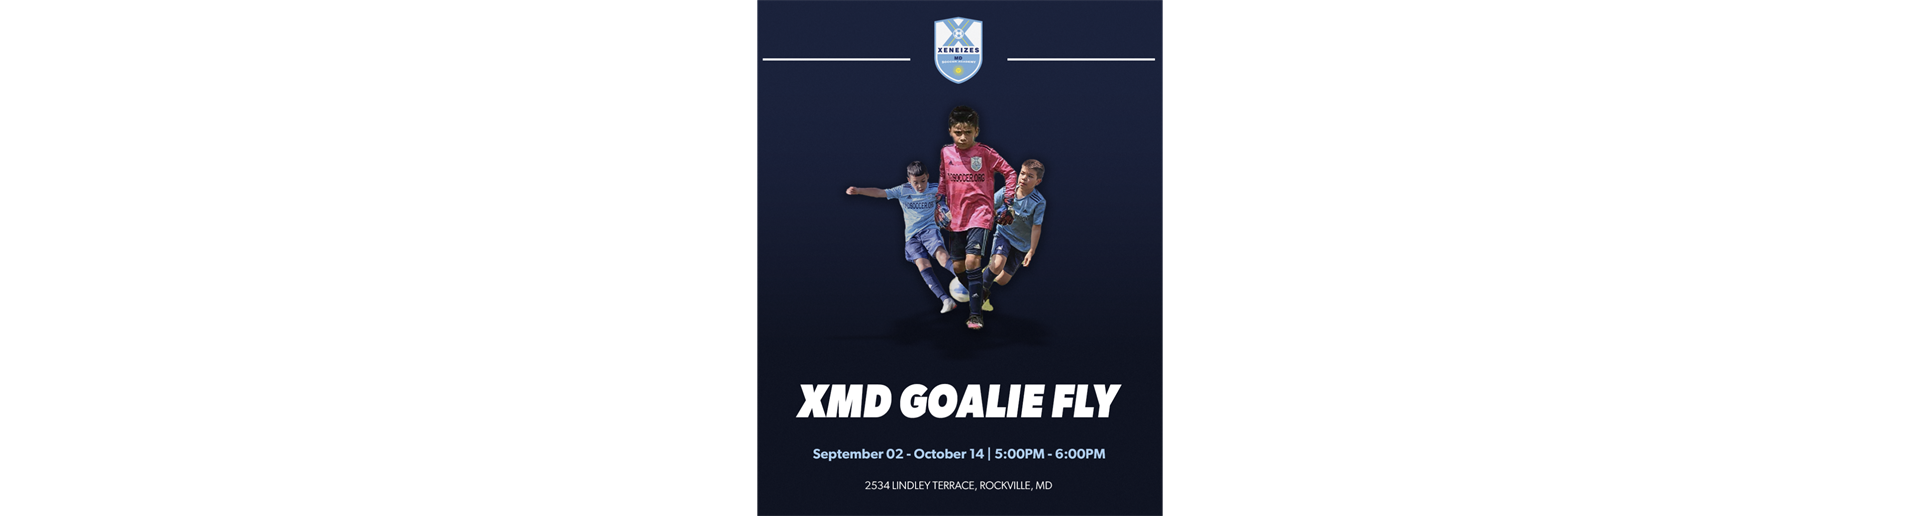 XMD Goalie Fly Sessions Are Back!